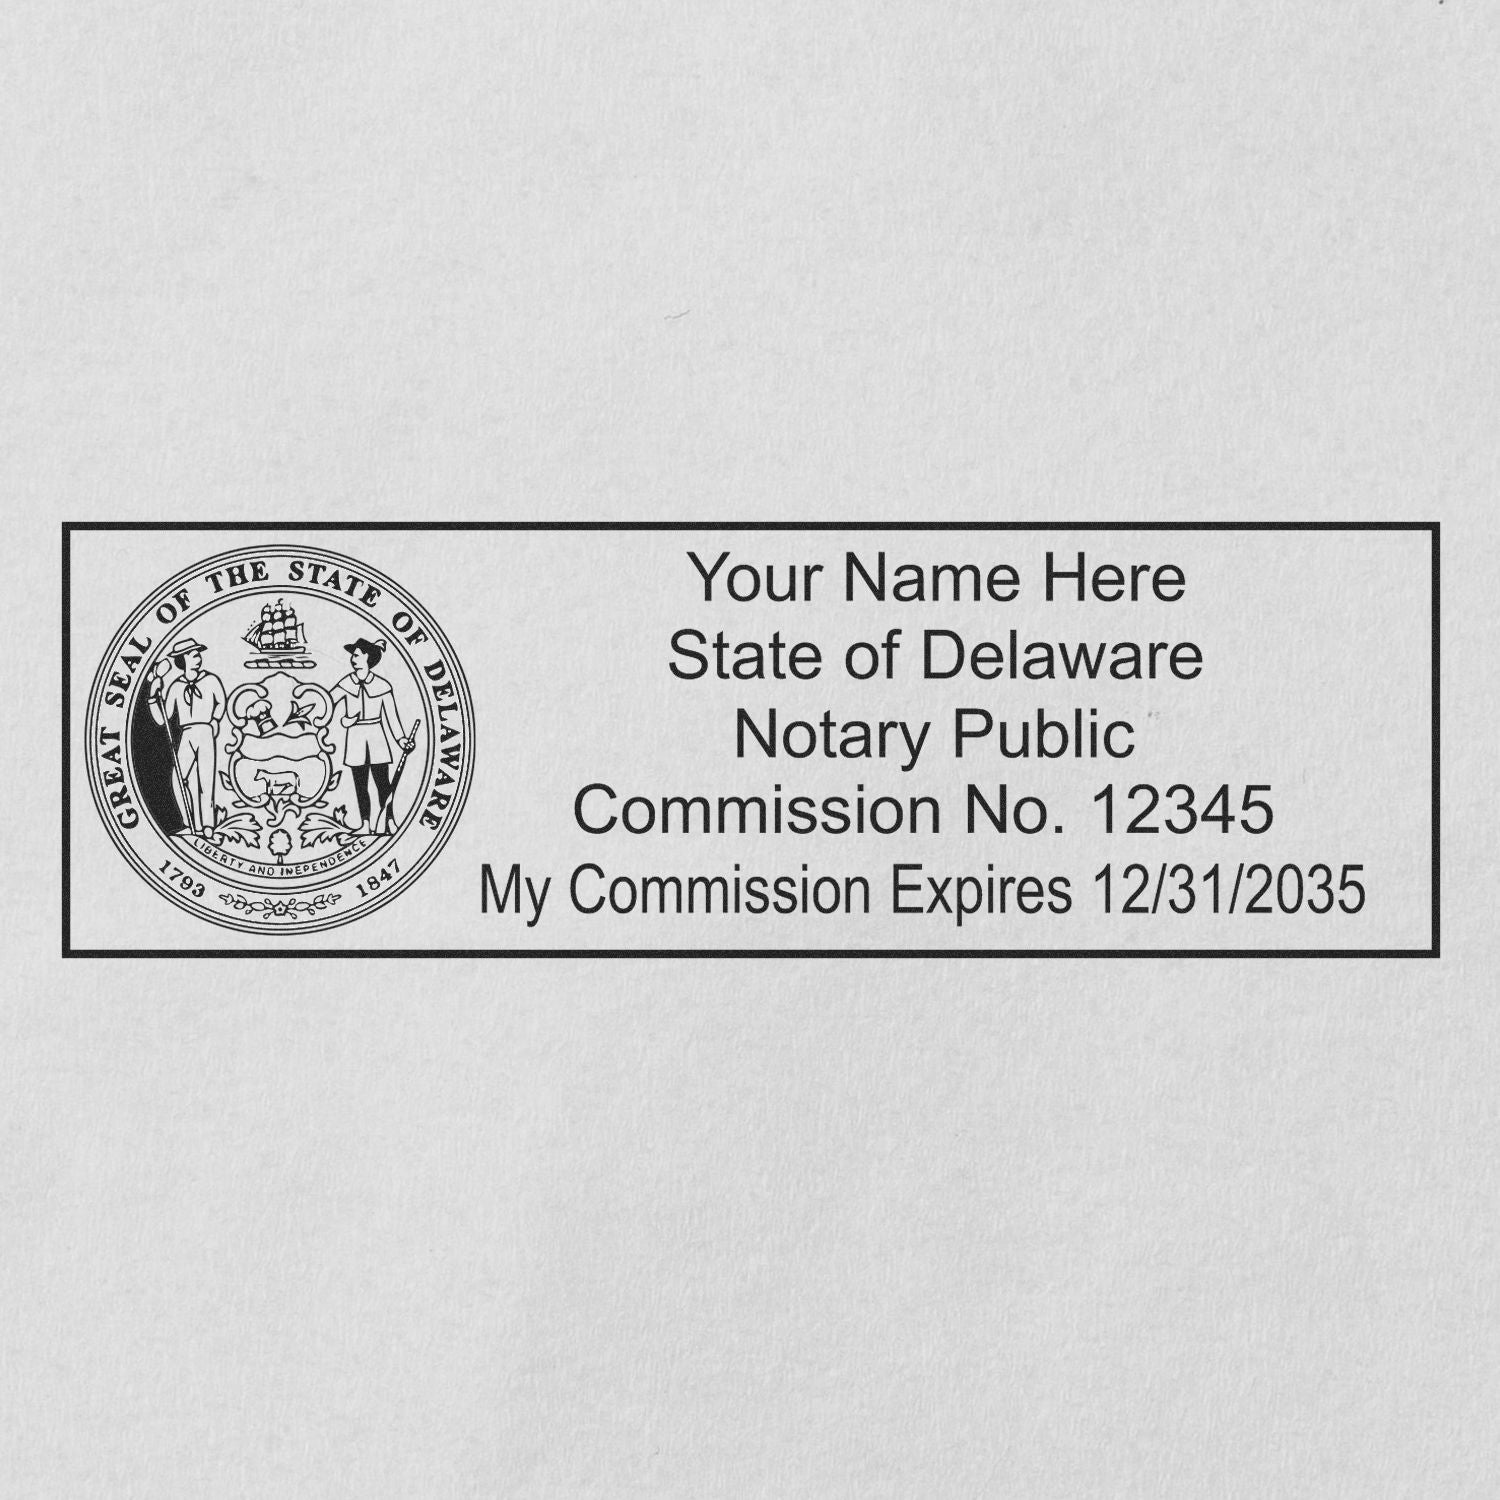 An alternative view of the Super Slim Delaware Notary Public Stamp stamped on a sheet of paper showing the image in use